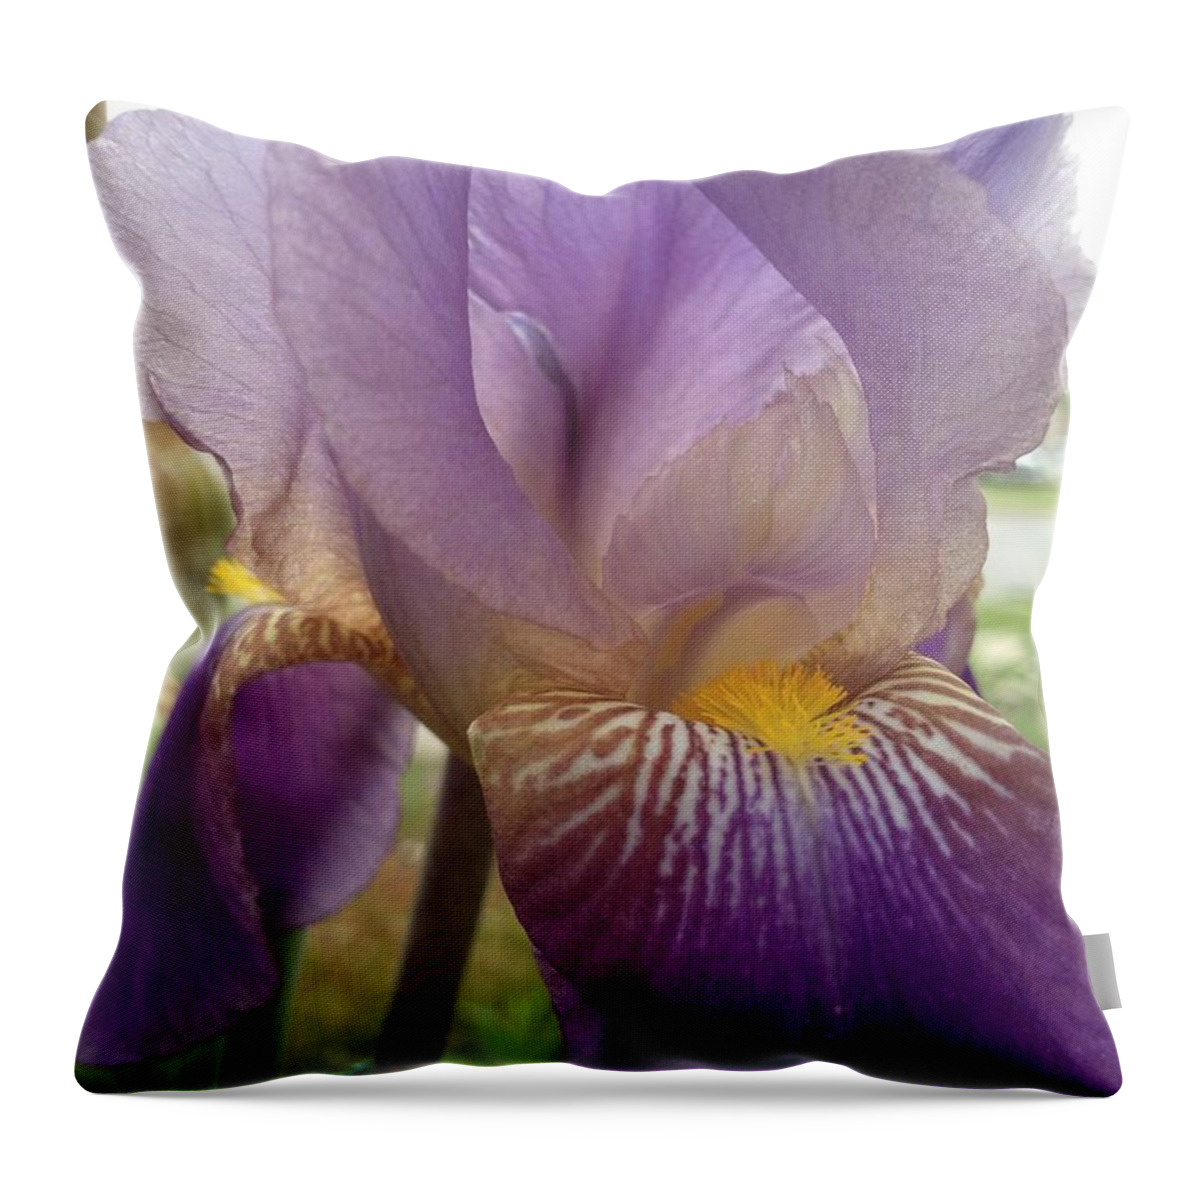 Purple Throw Pillow featuring the photograph Iris #1 by Pema Hou